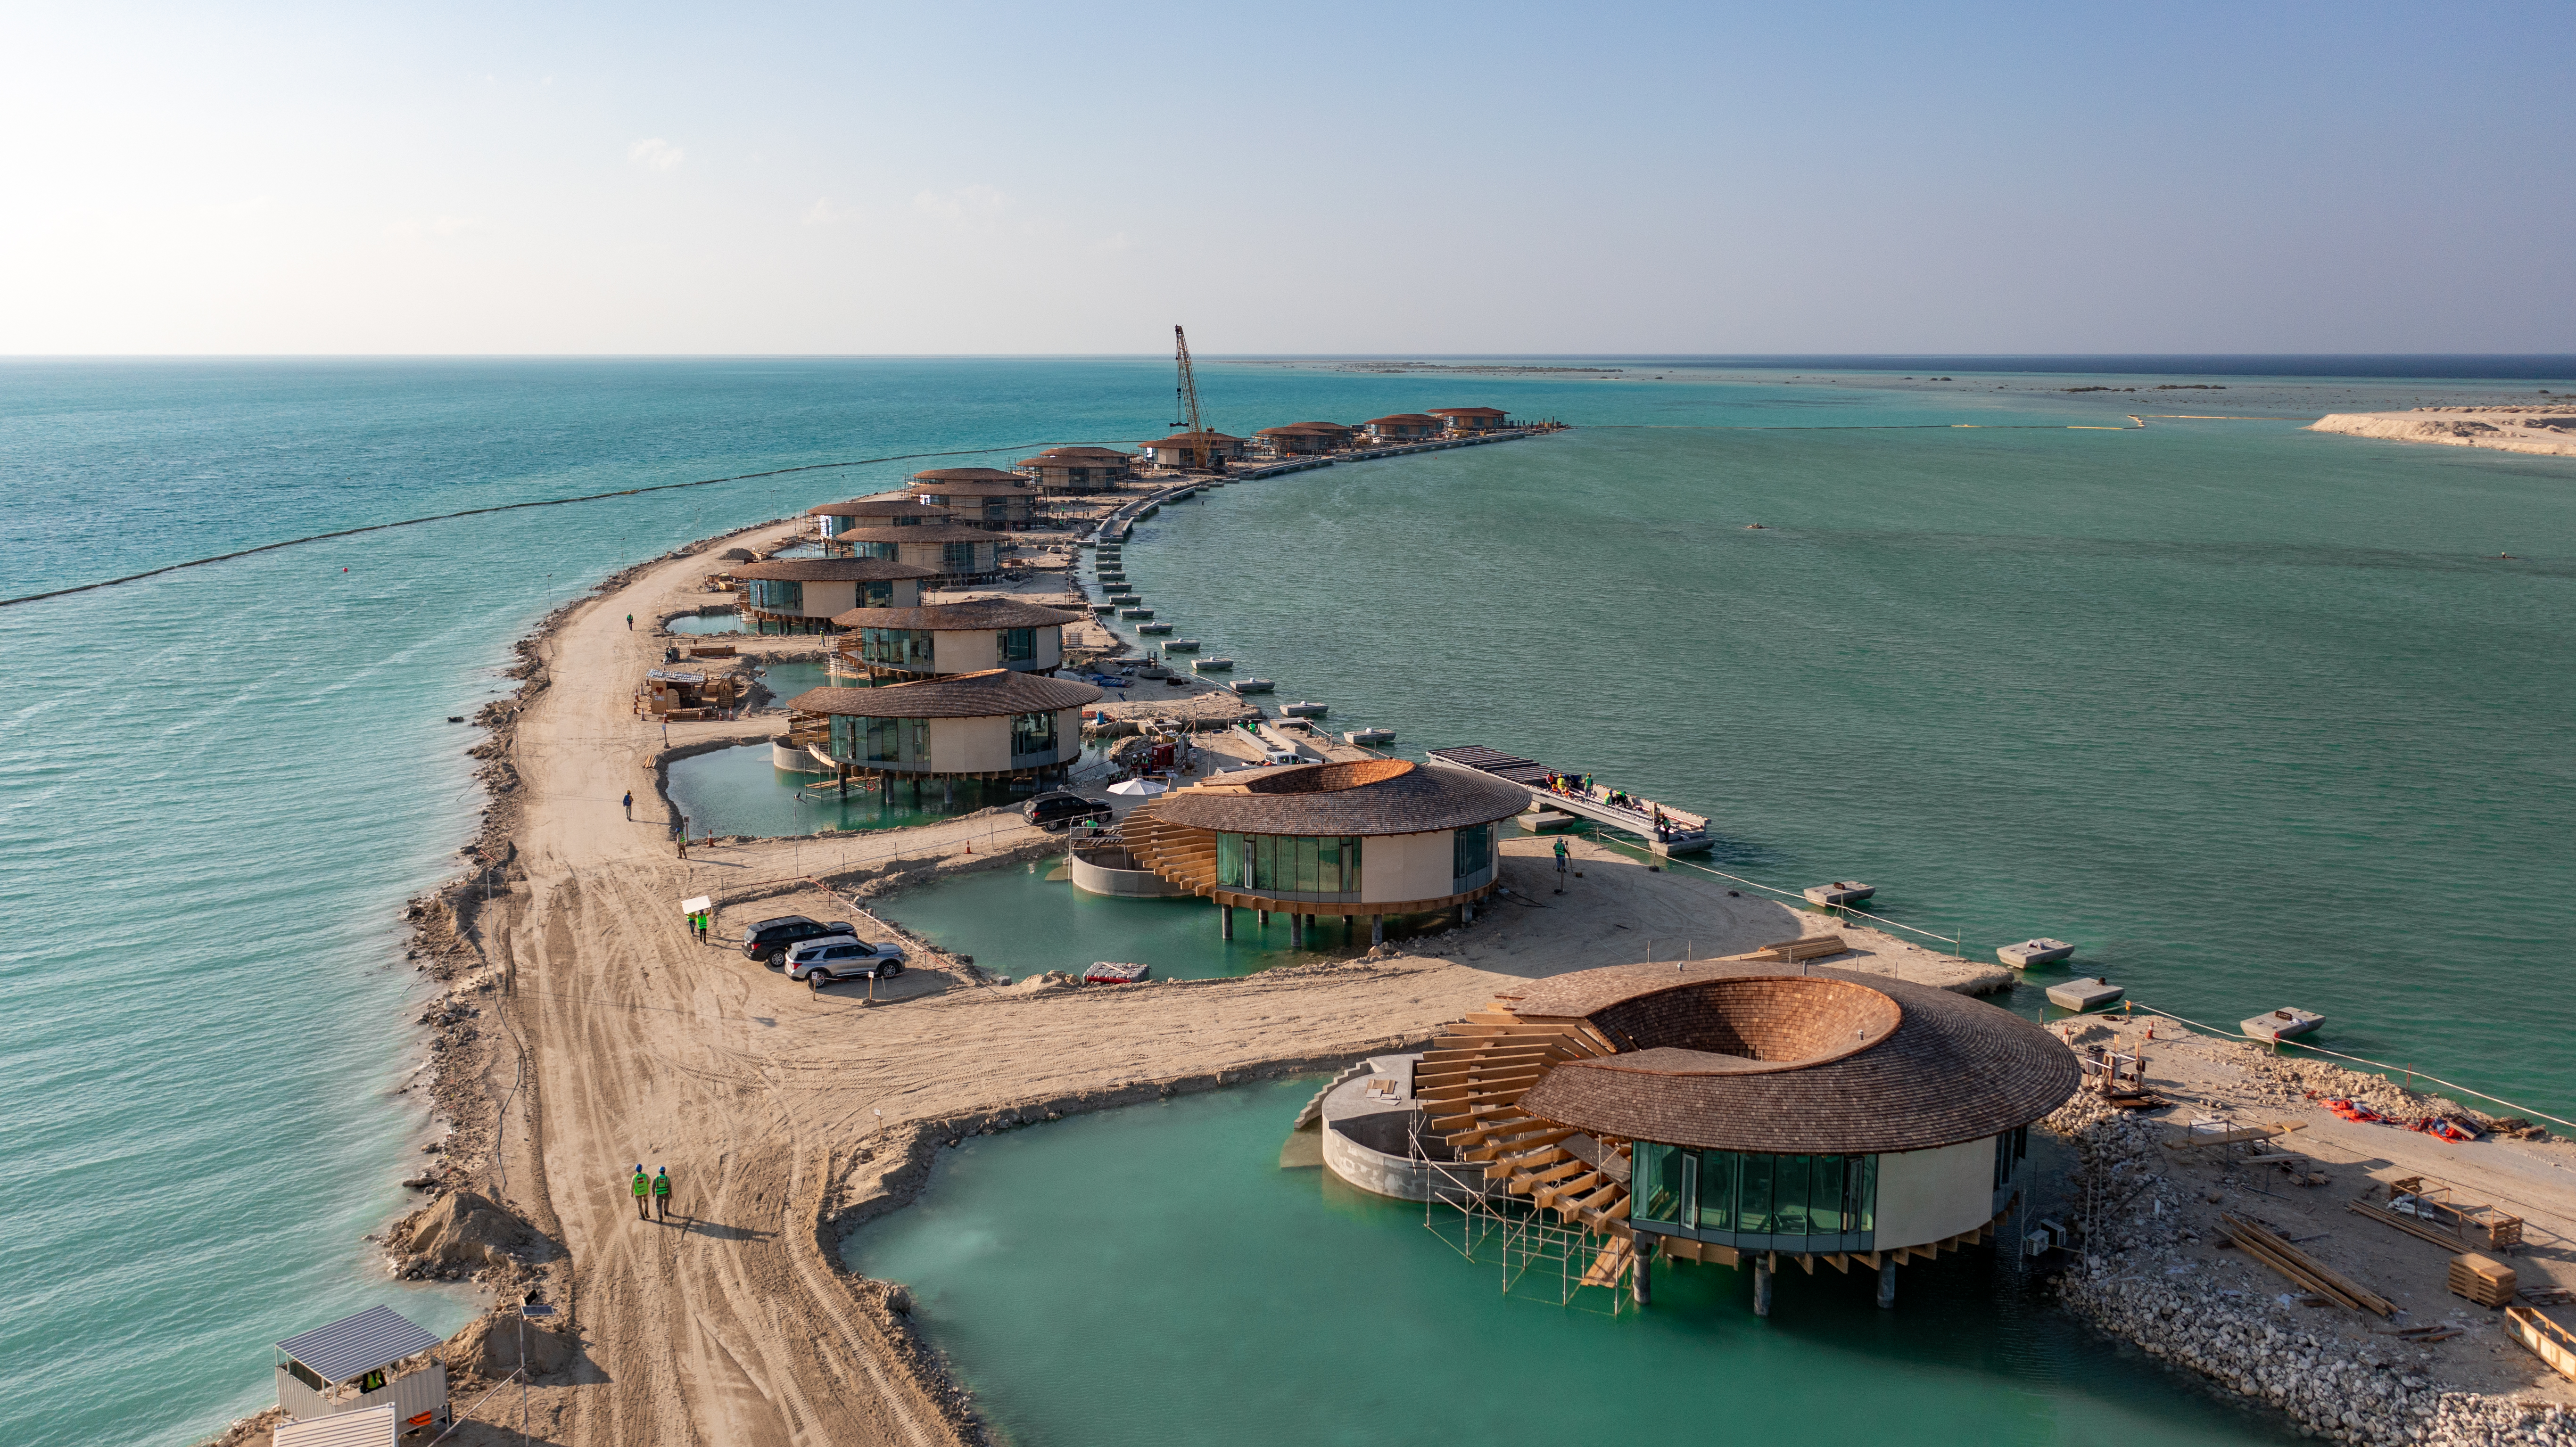 Red Sea Global appoints Blumer Lehmann for the timber construction planning, fabrication and supply works for resort based on Ummahat Island